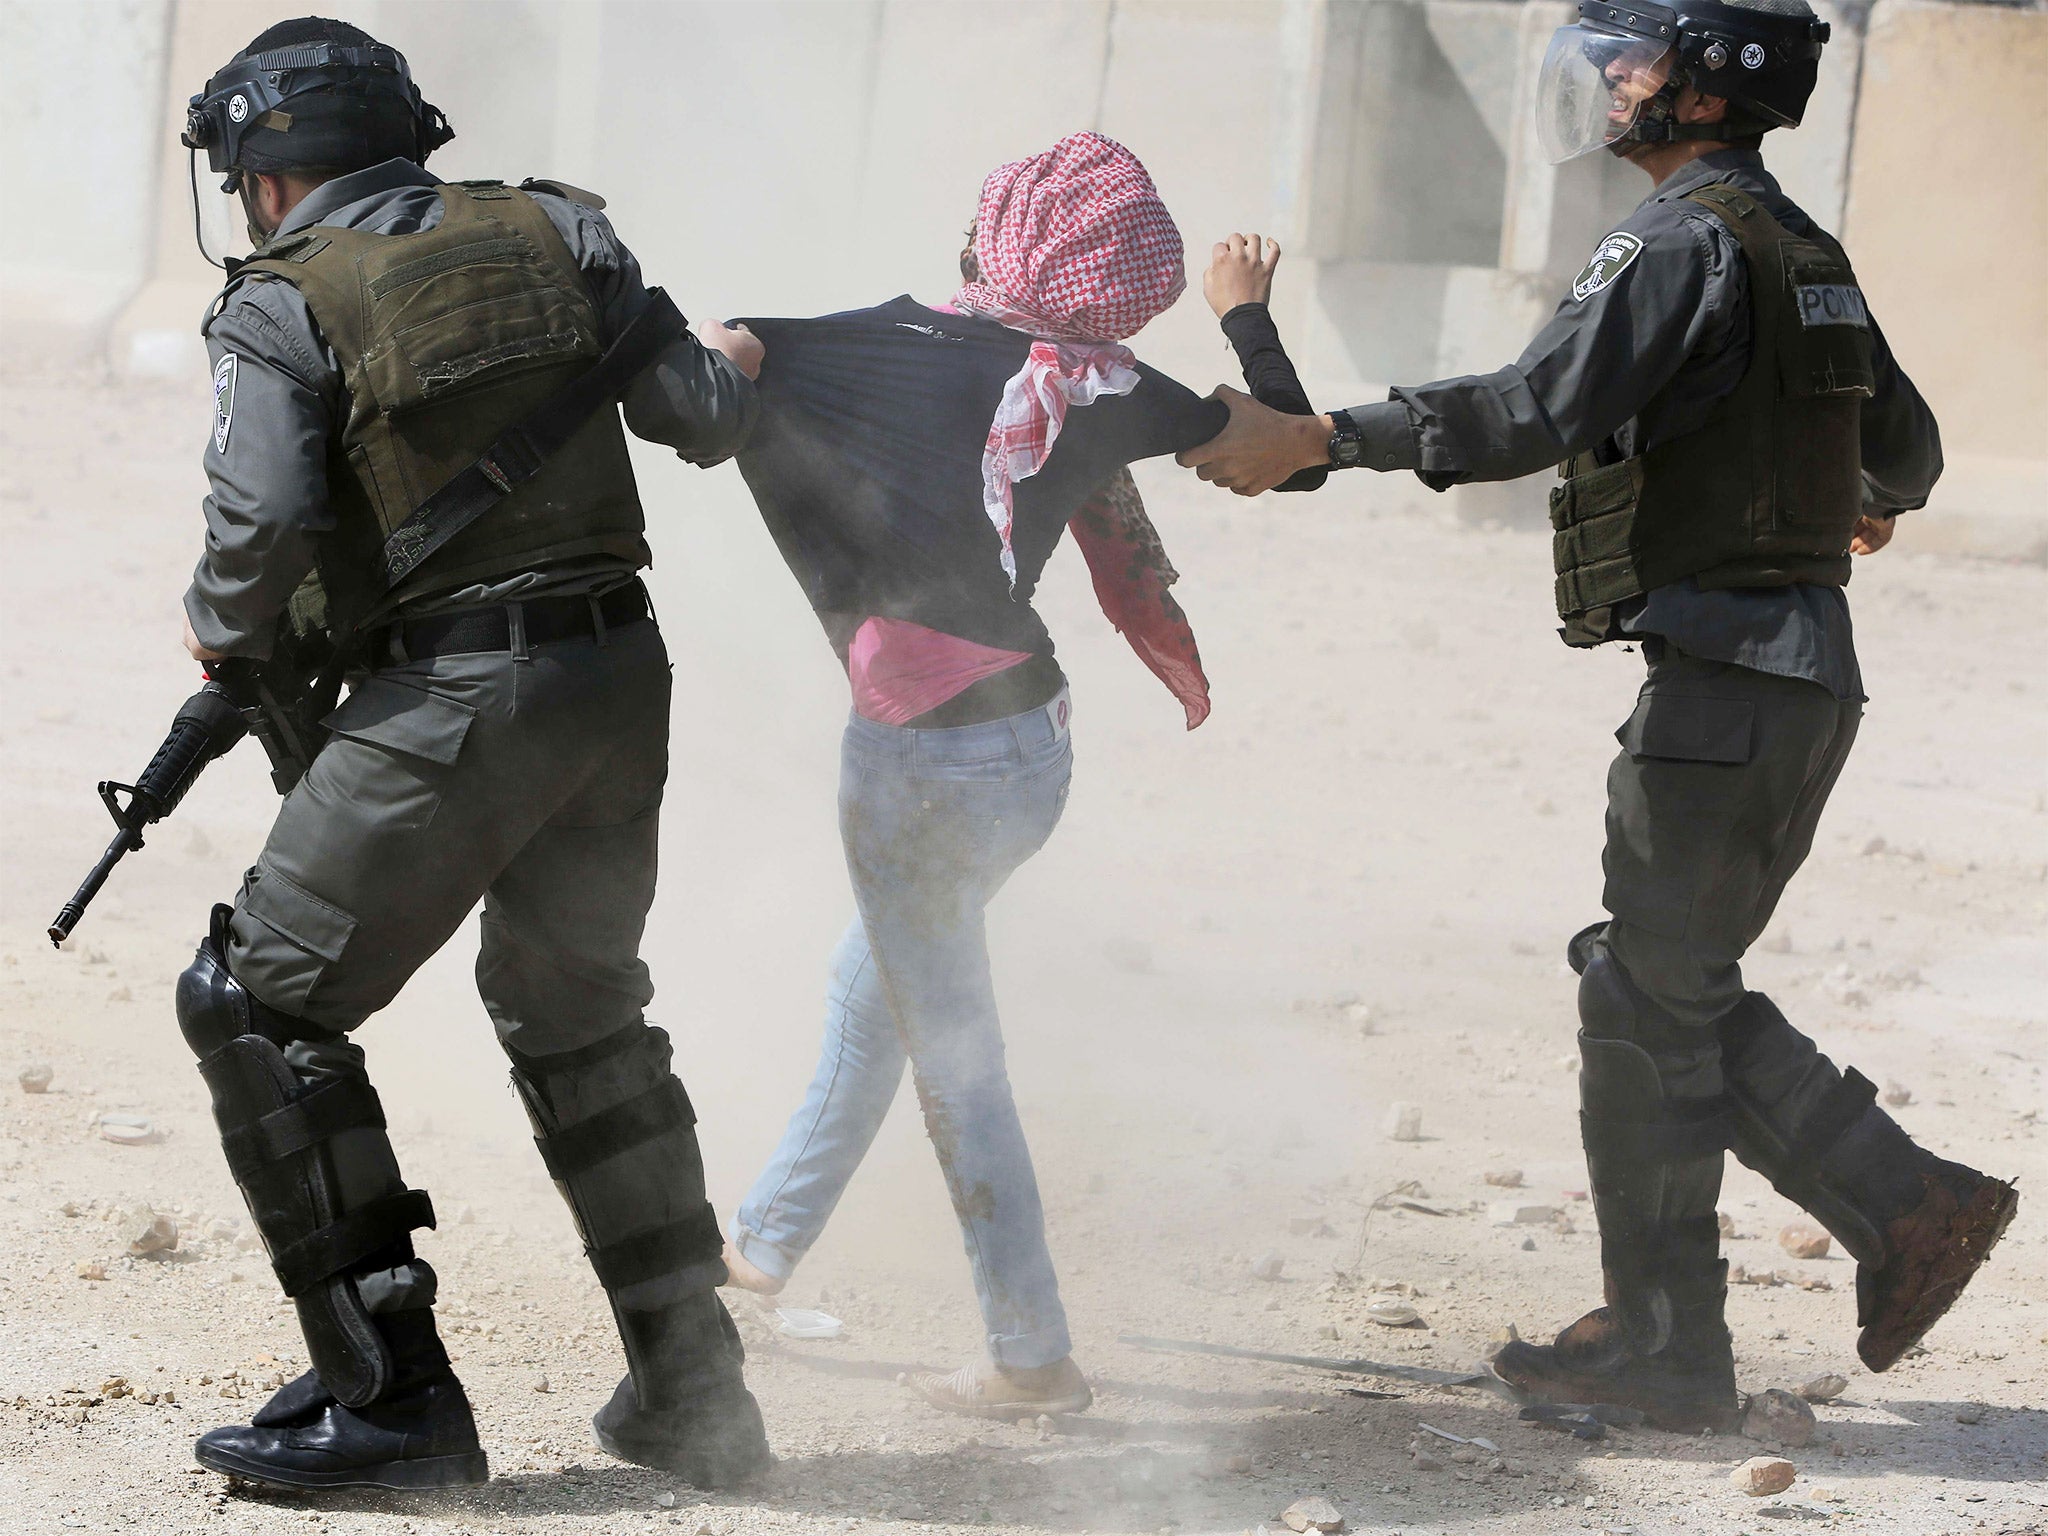 Israeli border guards detain a Palestinian protester during clashes following a demonstration against the incarceration of Palestinian university students, near Ramallah